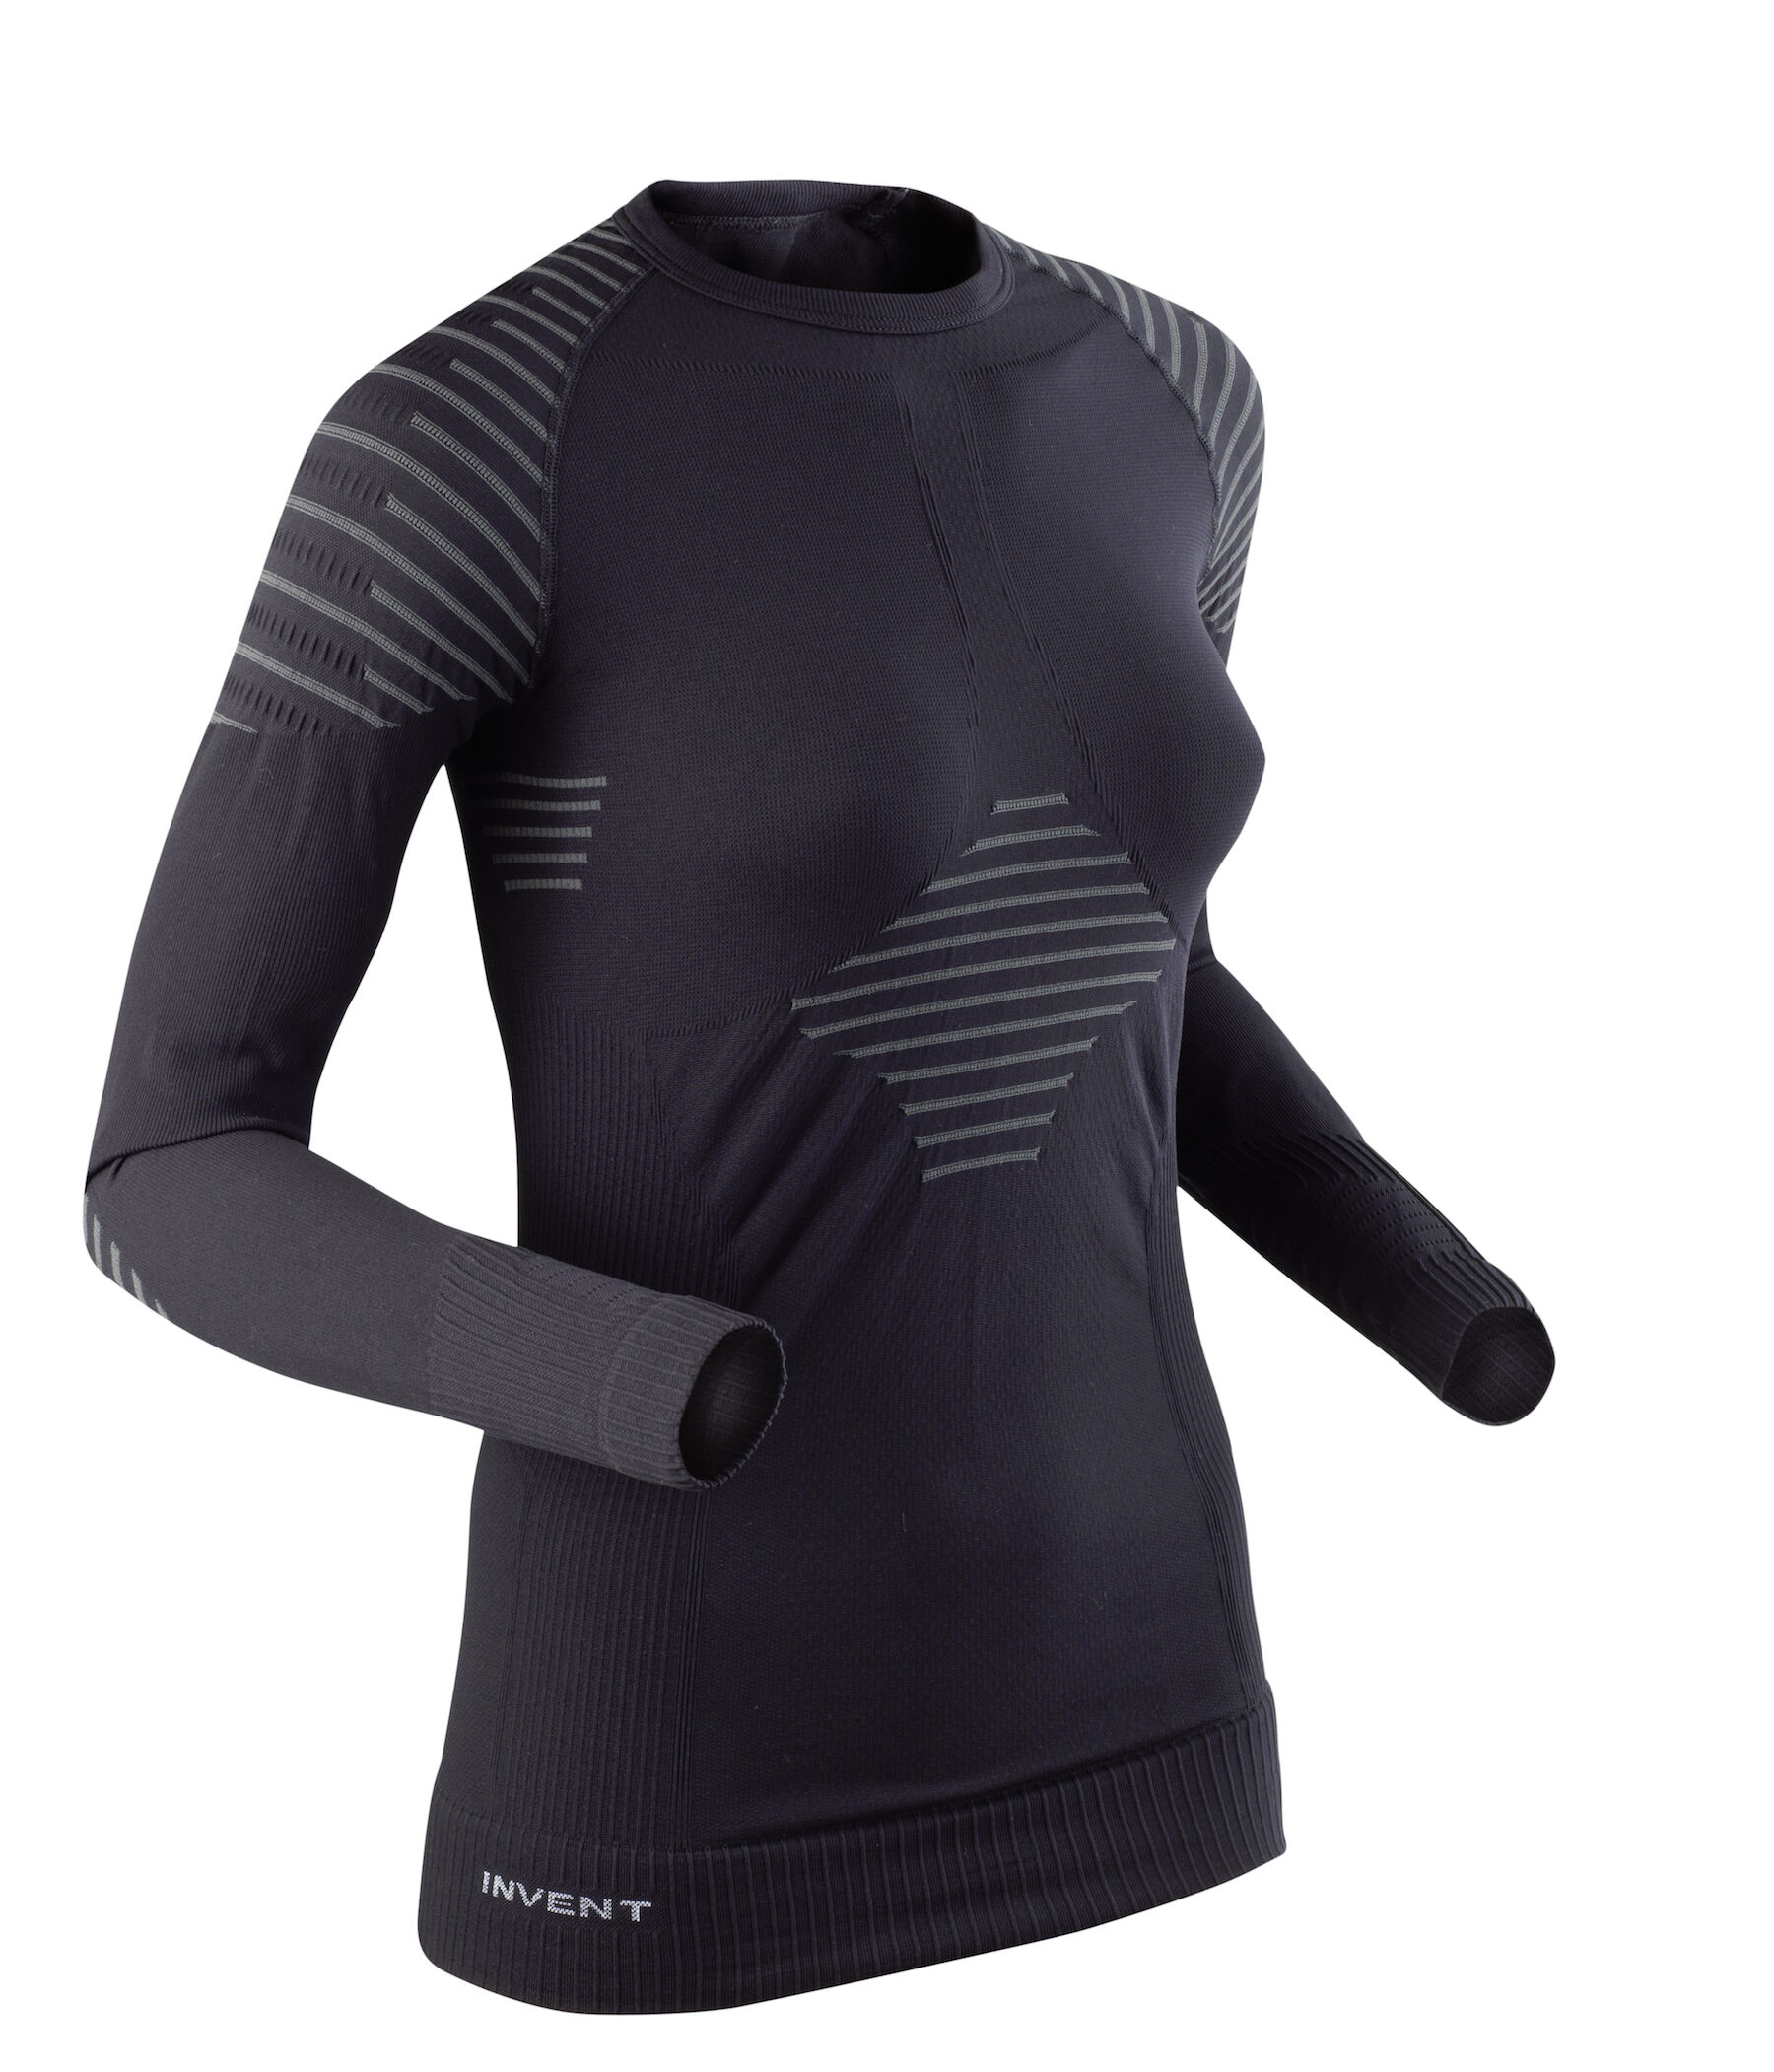 X-Bionic Invent shirt long sleeves - Maillot femme | Hardloop